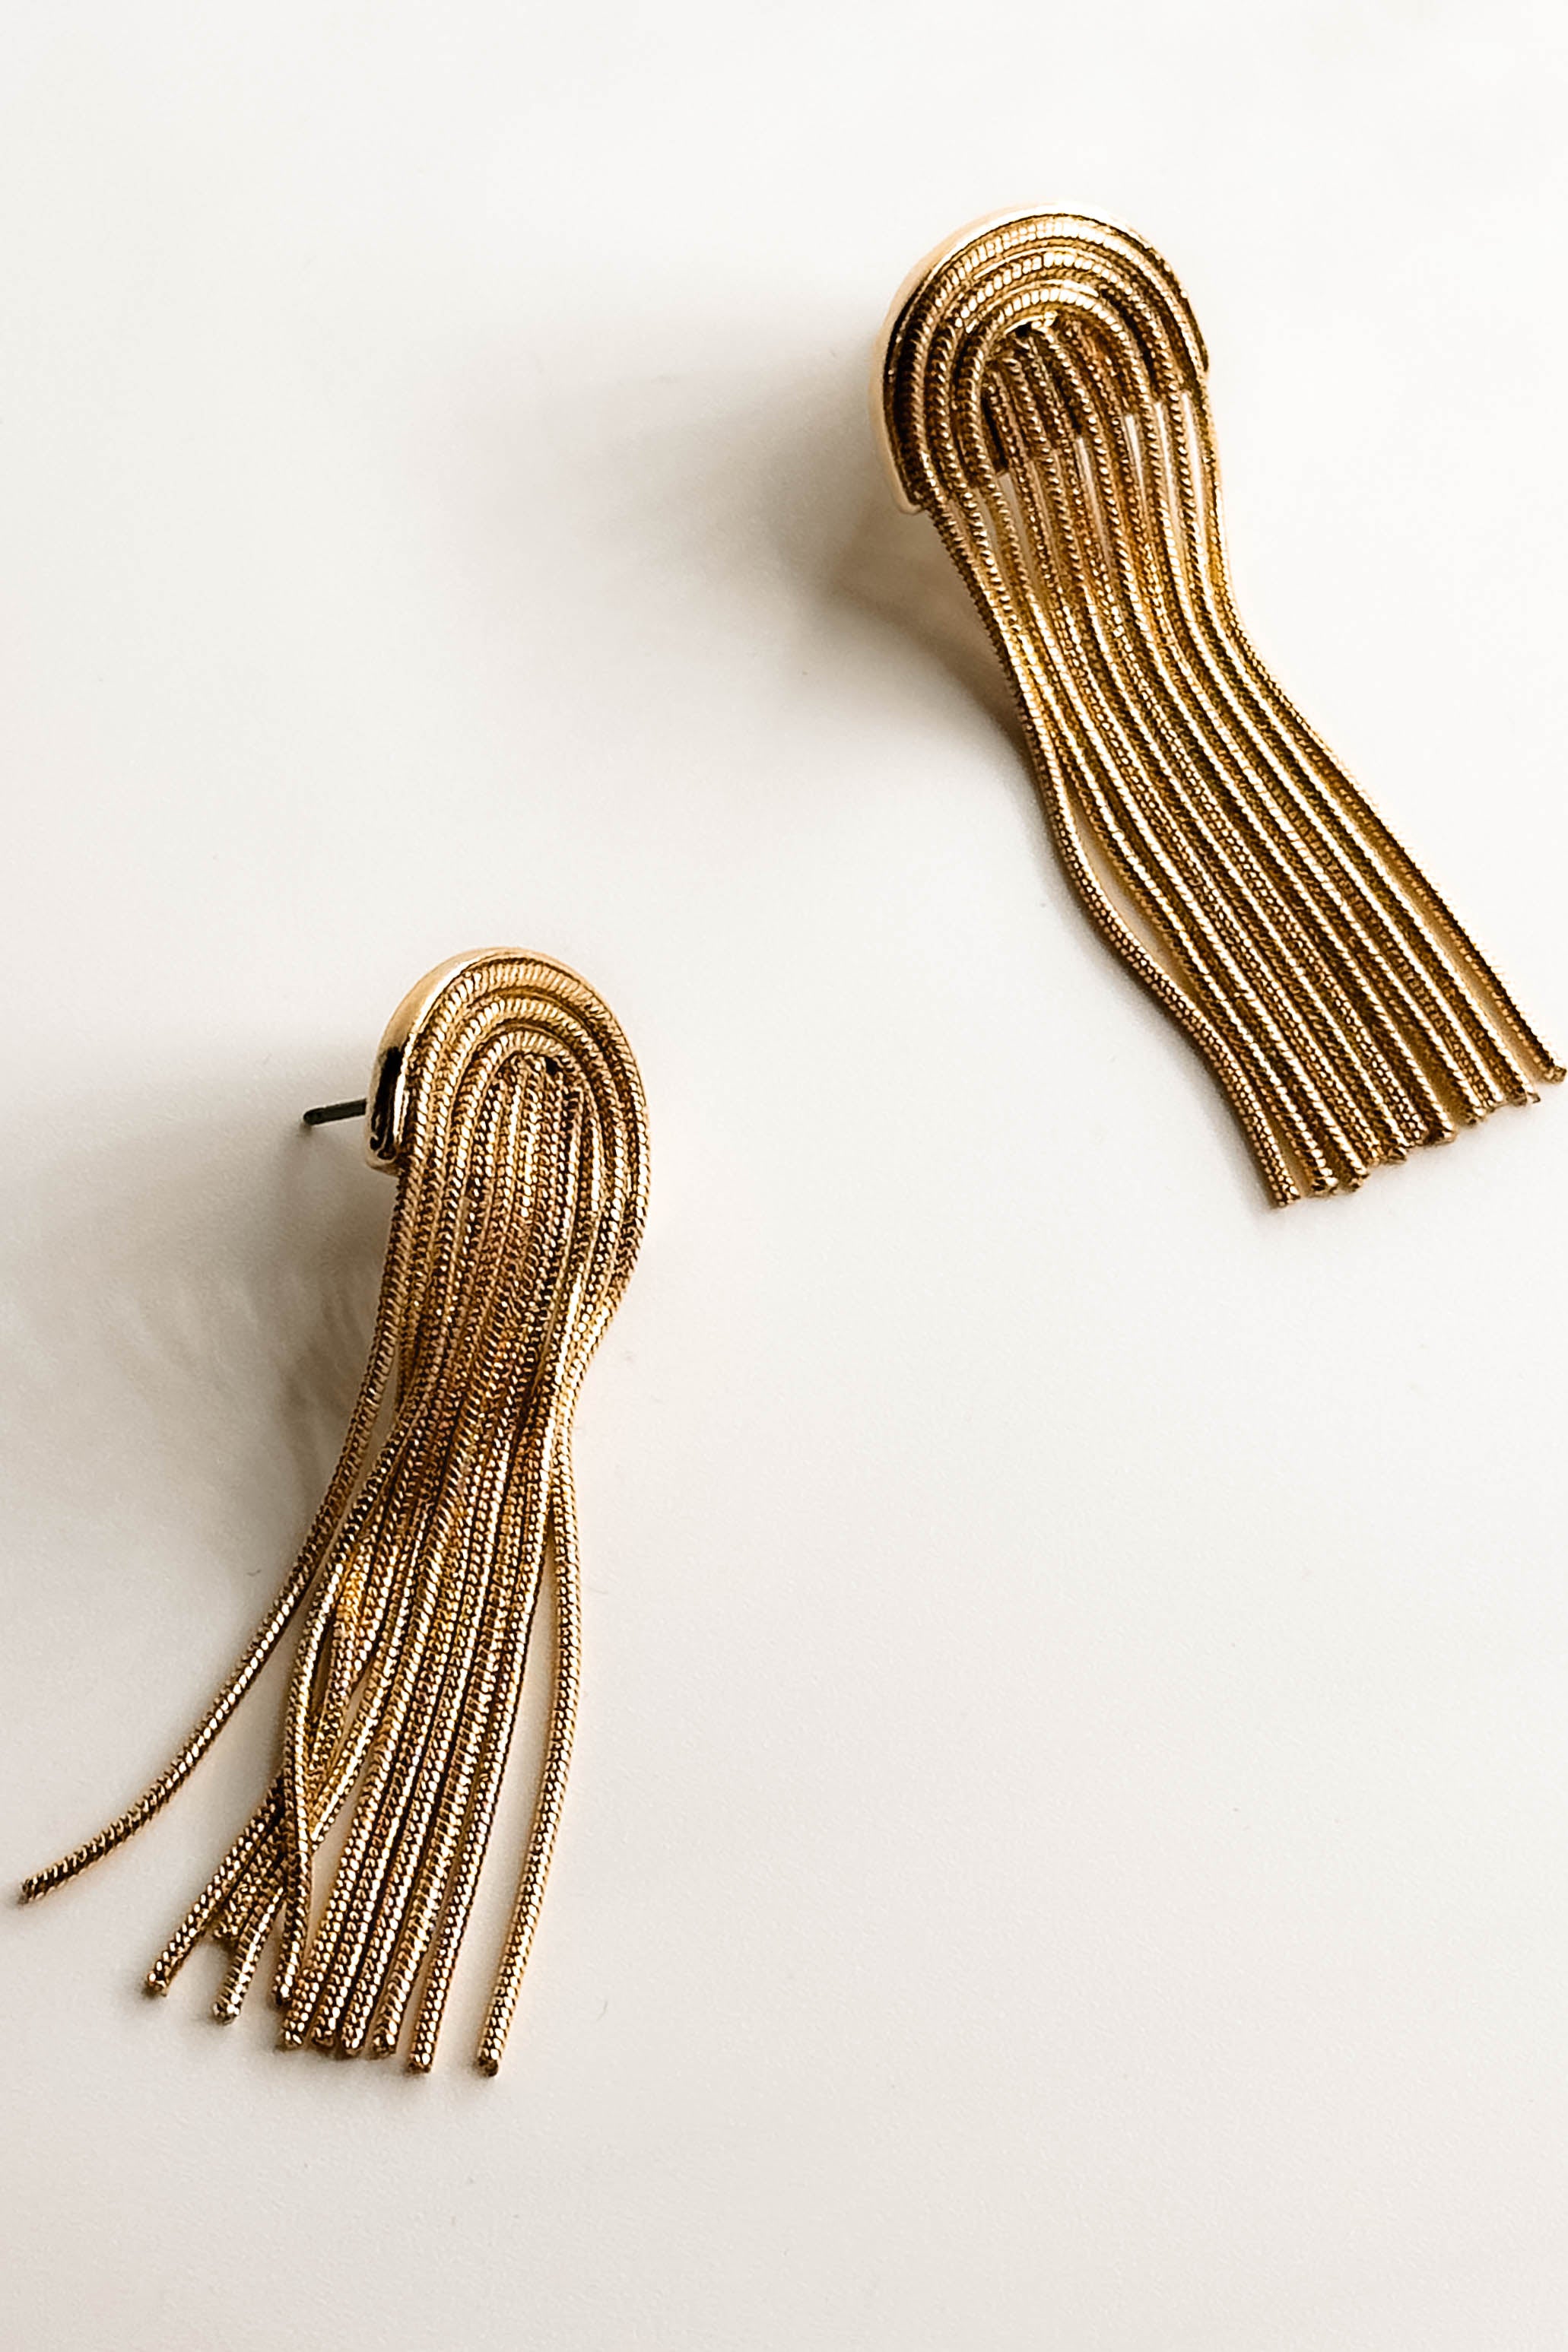 Top view of the Celine Gold Arch Fringe Earrings that feature gold arches on post backs with gold fringe, shown on white paper.